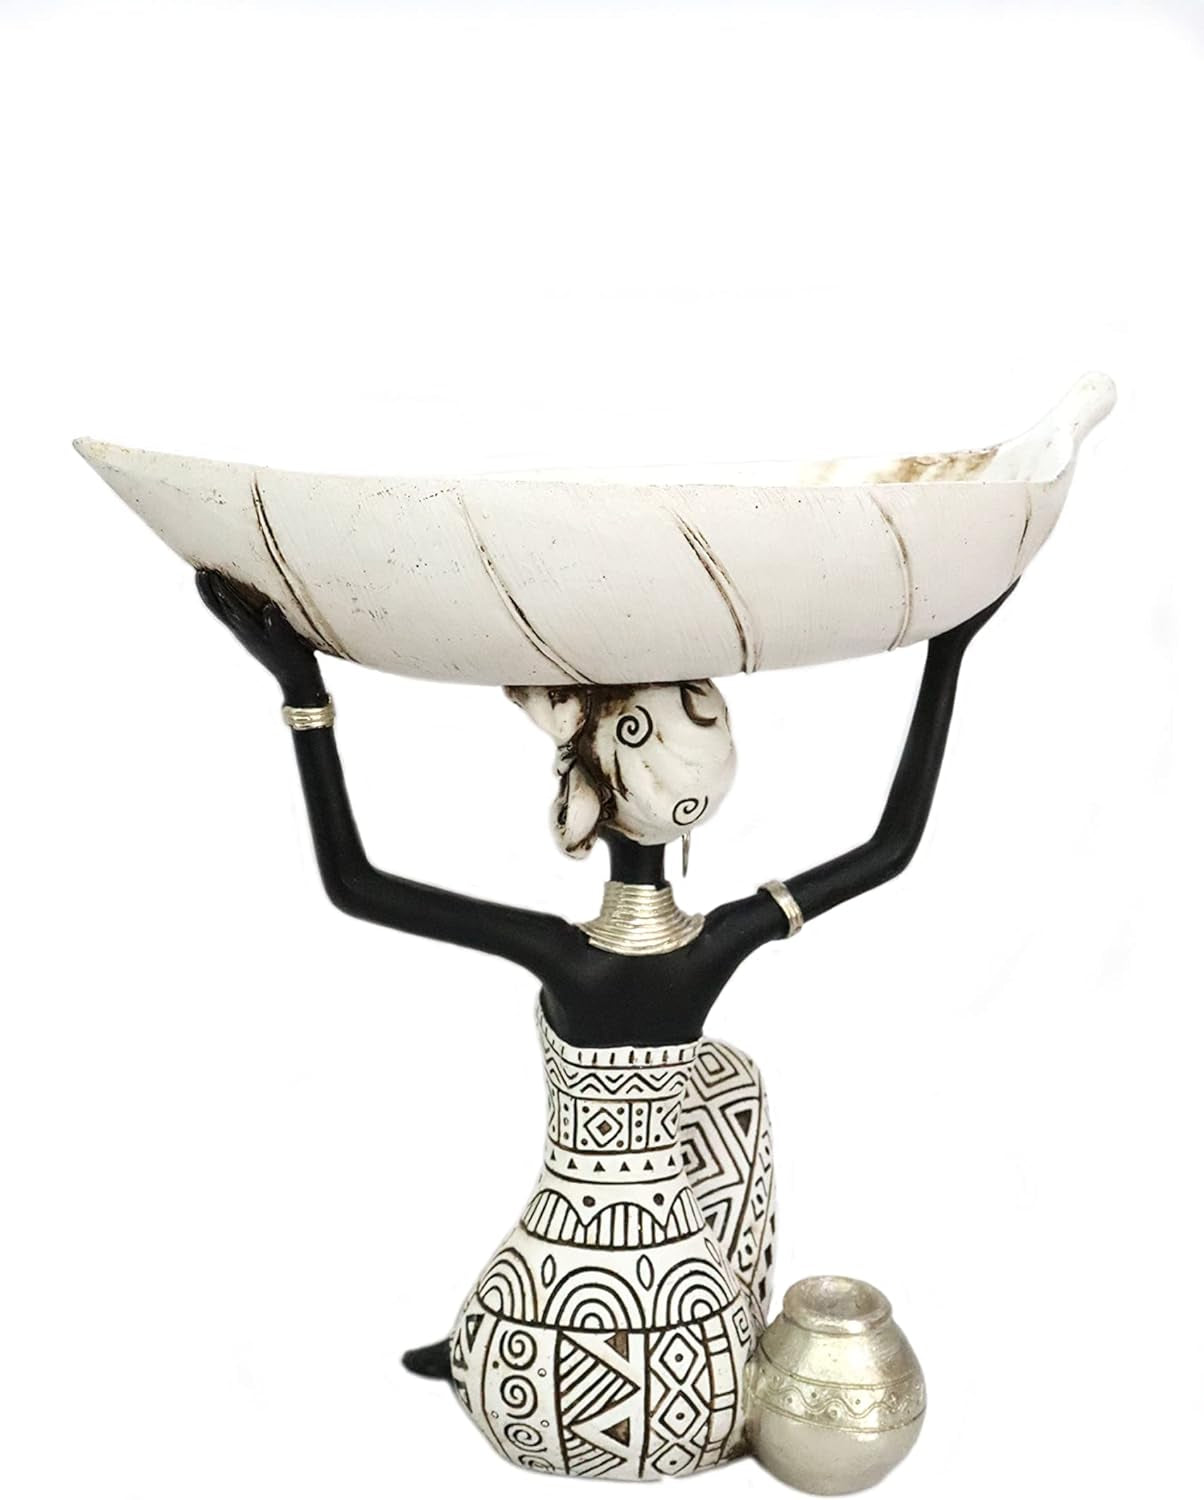 African Tribal Lady Holders Figurine, African Statue Home Decoration, Sculptures Table Top Bookshelf Decor for Wedding,Church,Holiday Decor-African Decorative White Color(313-B)